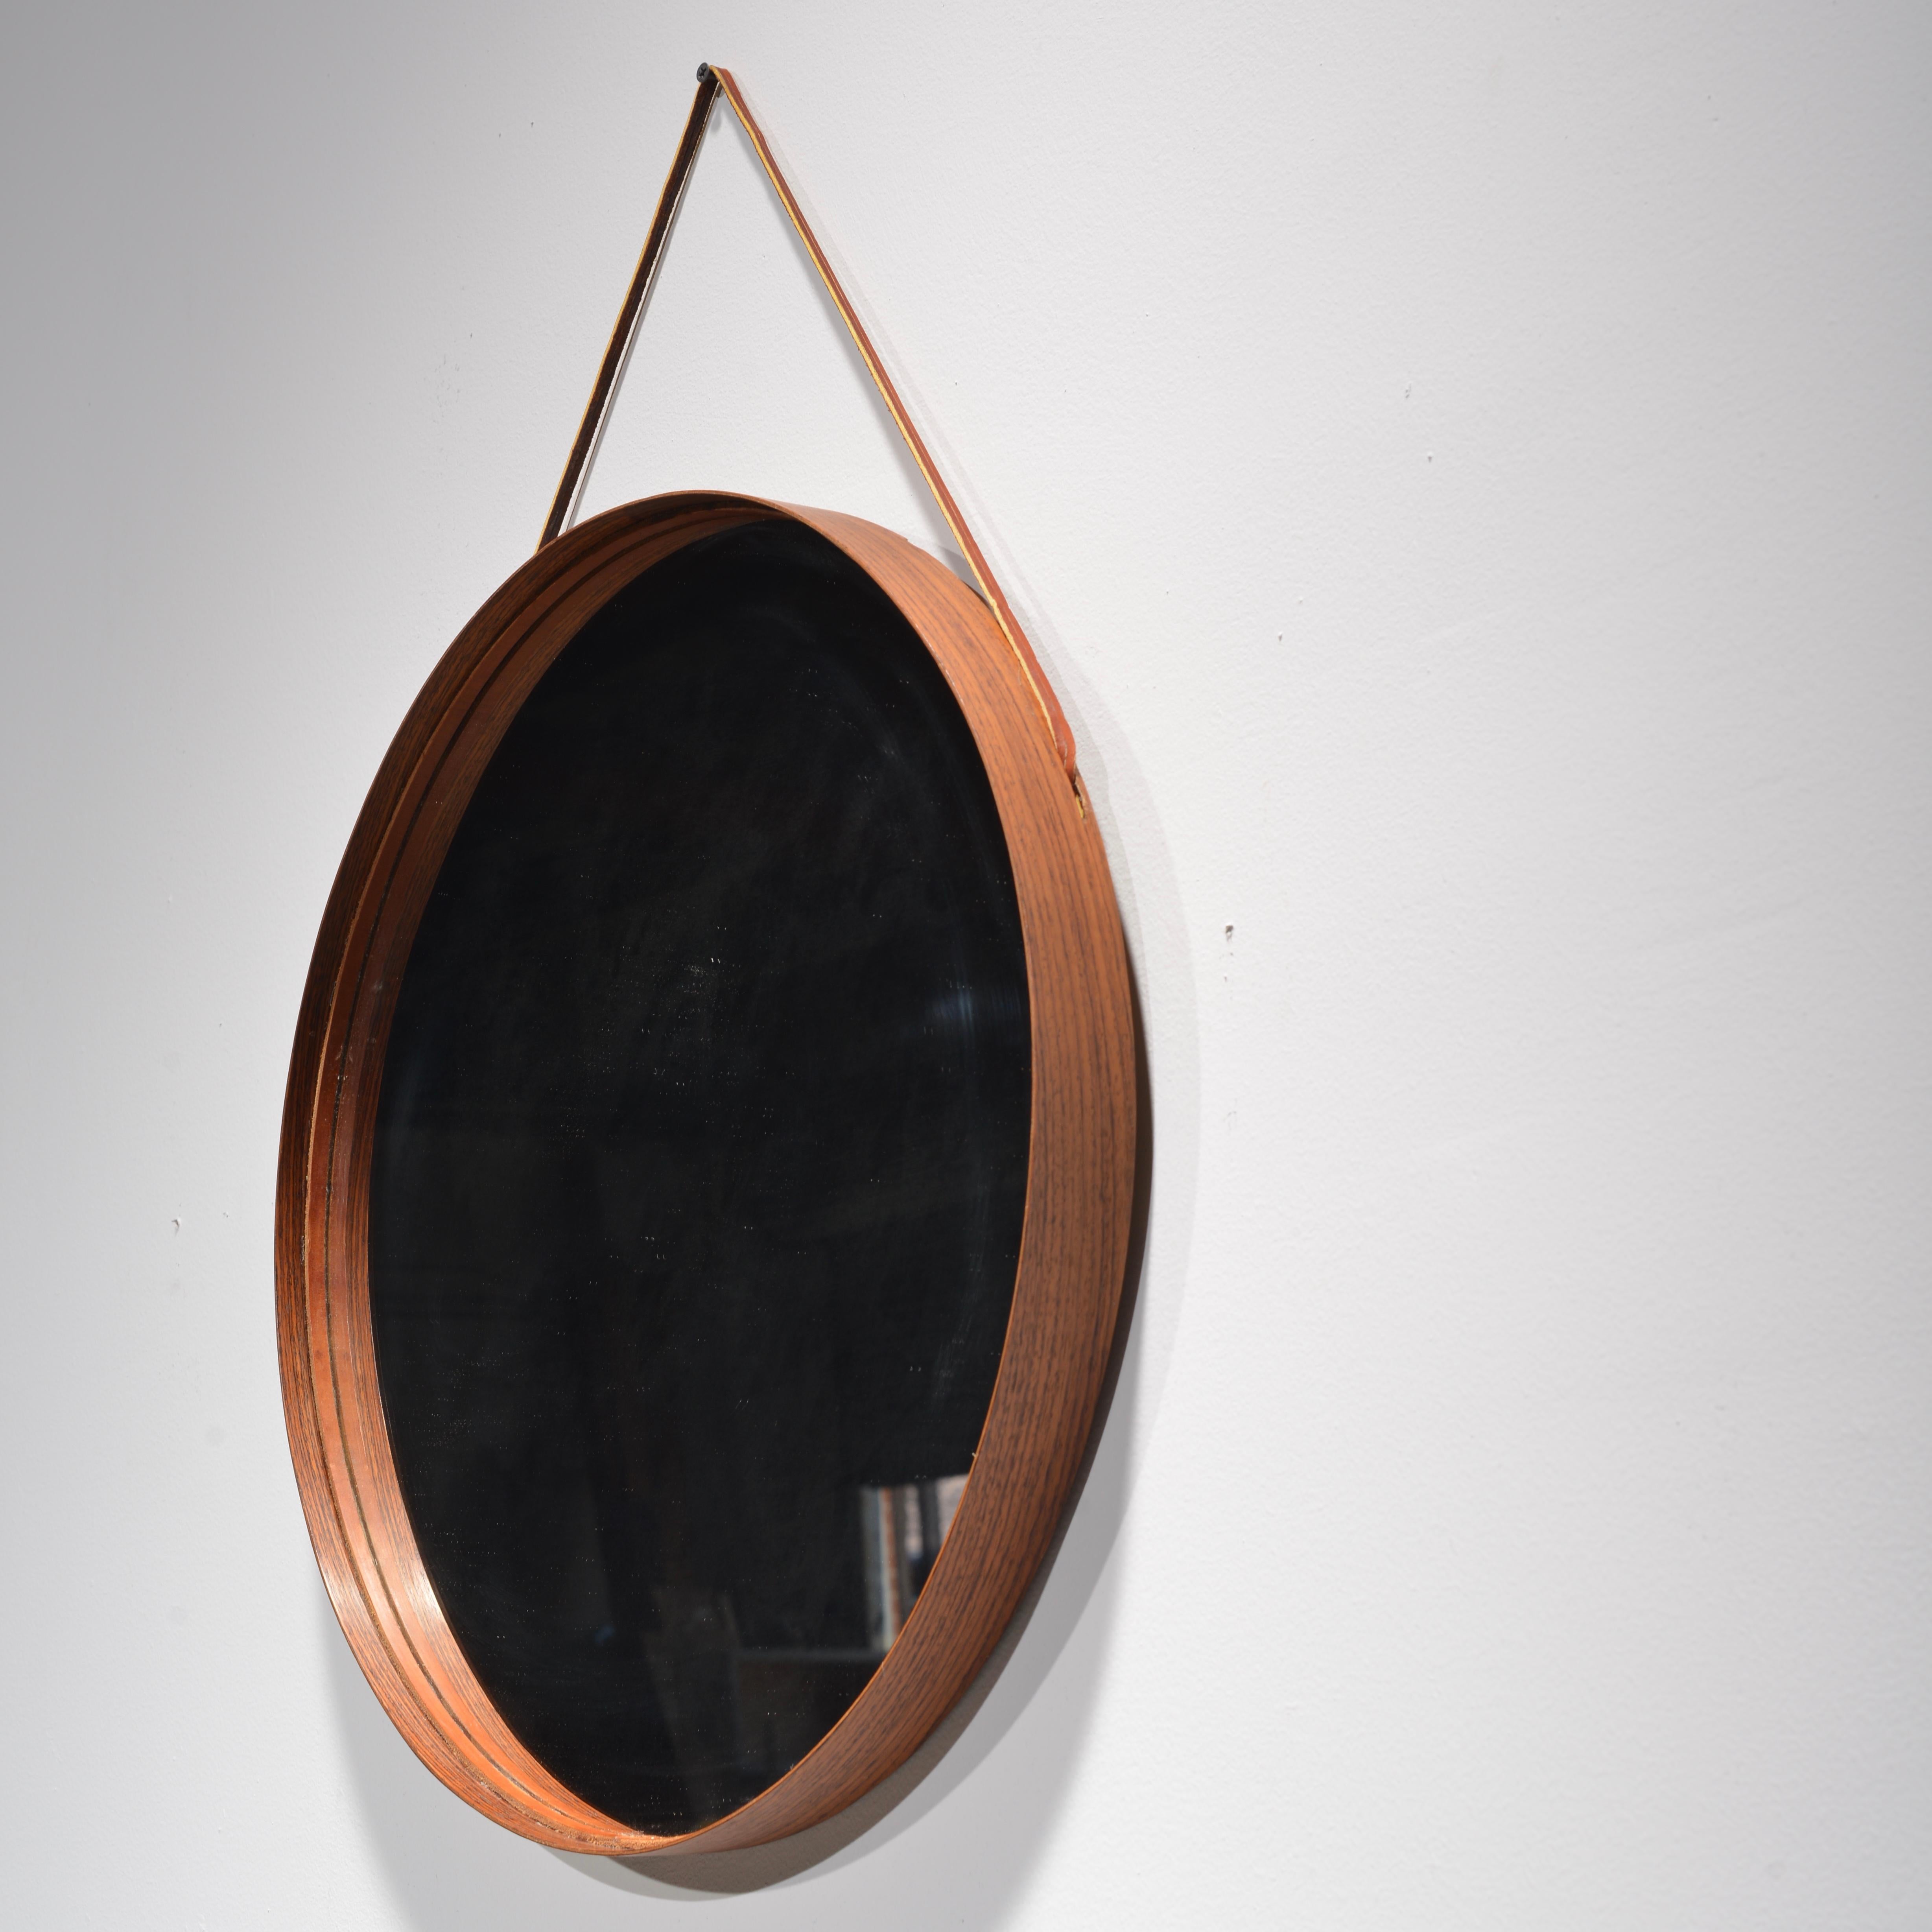 Rosewood and leather round wall mirror by Uno & Osten Kristiansson for Glas Mäster.